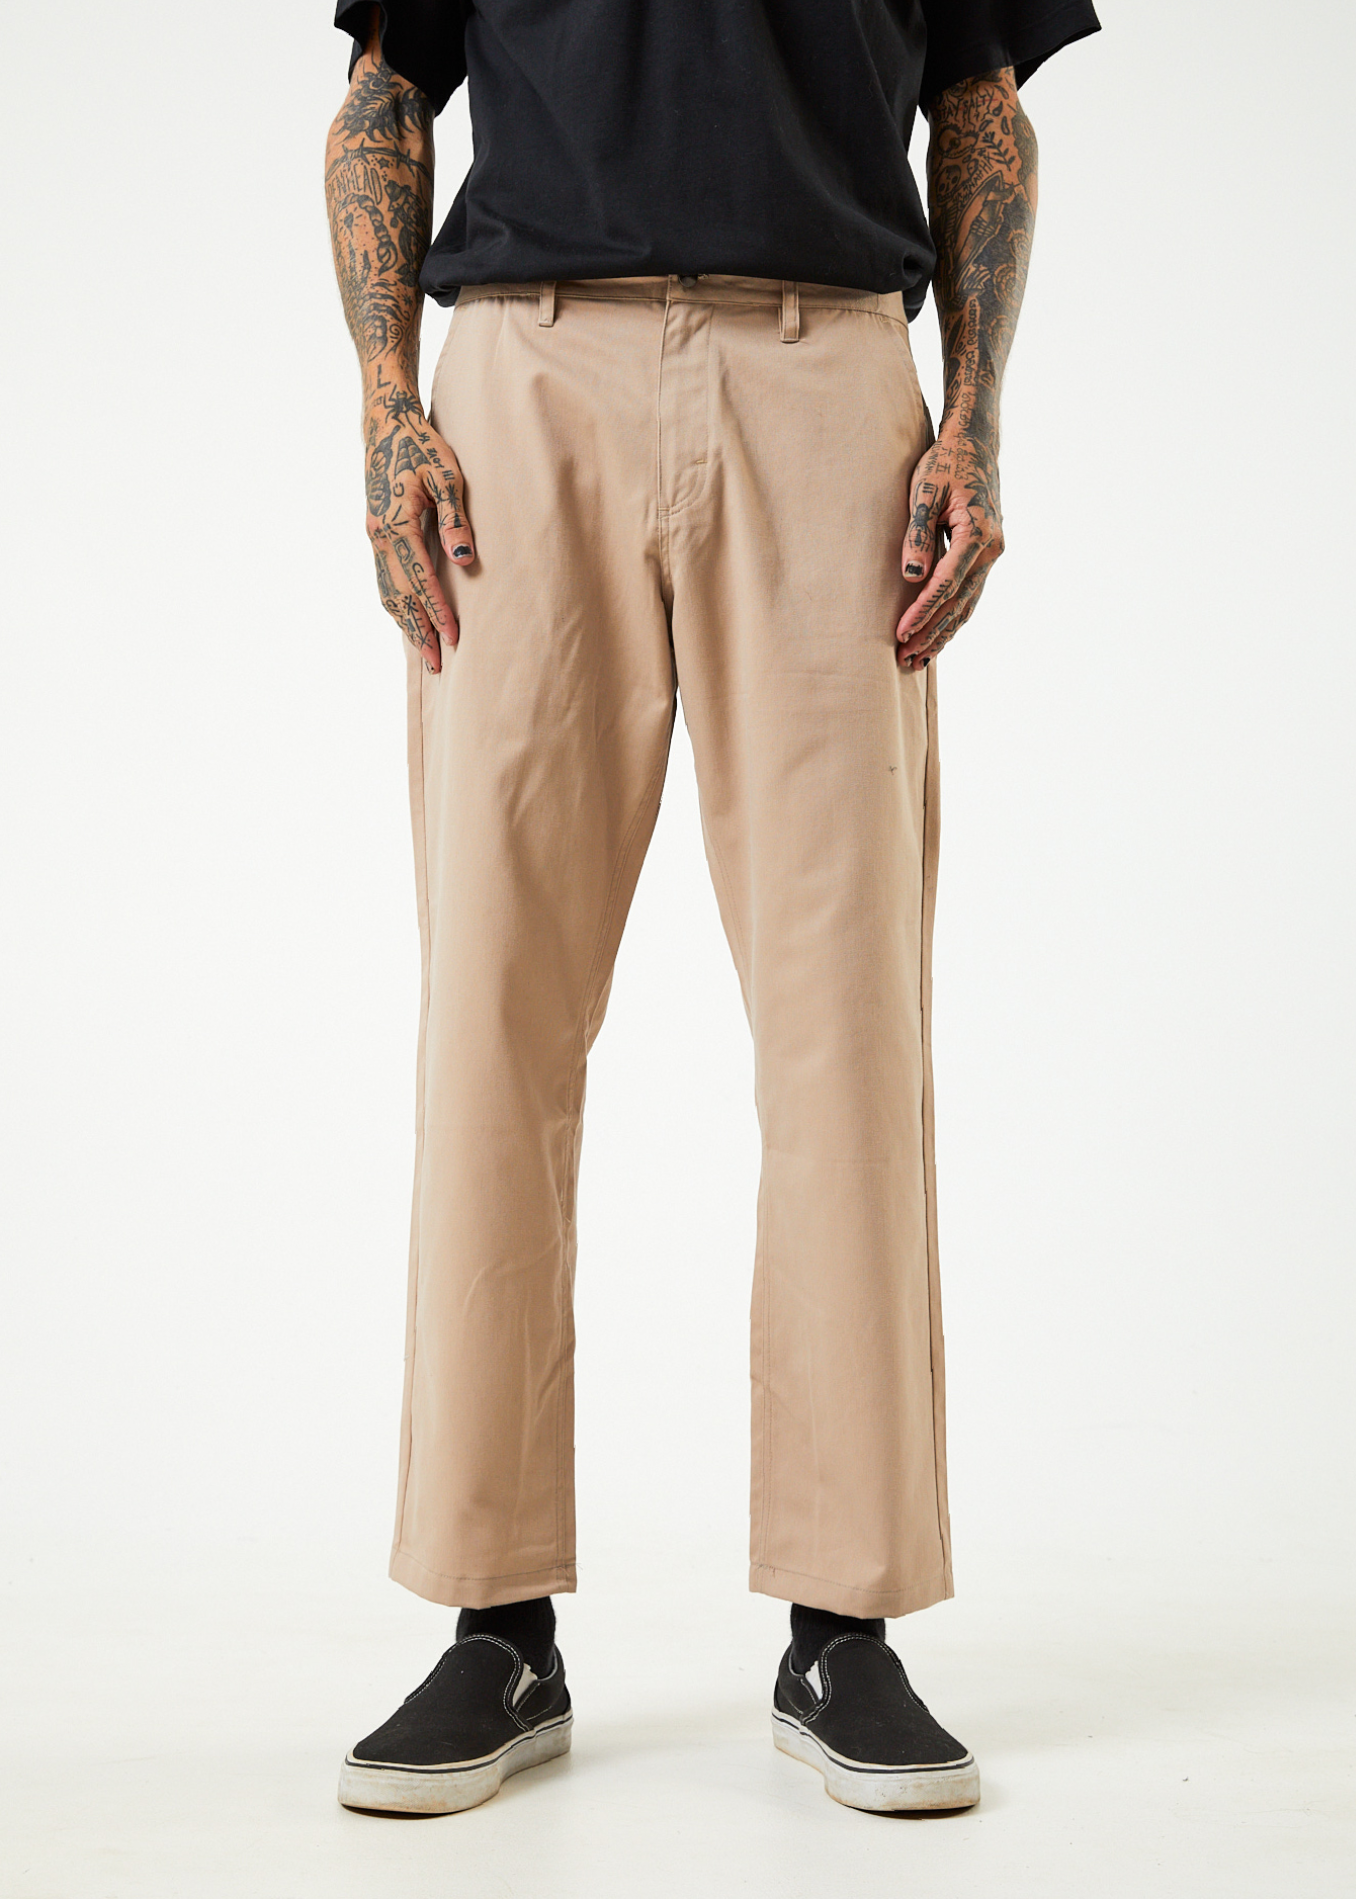 Afends Mens Ninety Twos Recycled Chino Pants Bone Afends AU.